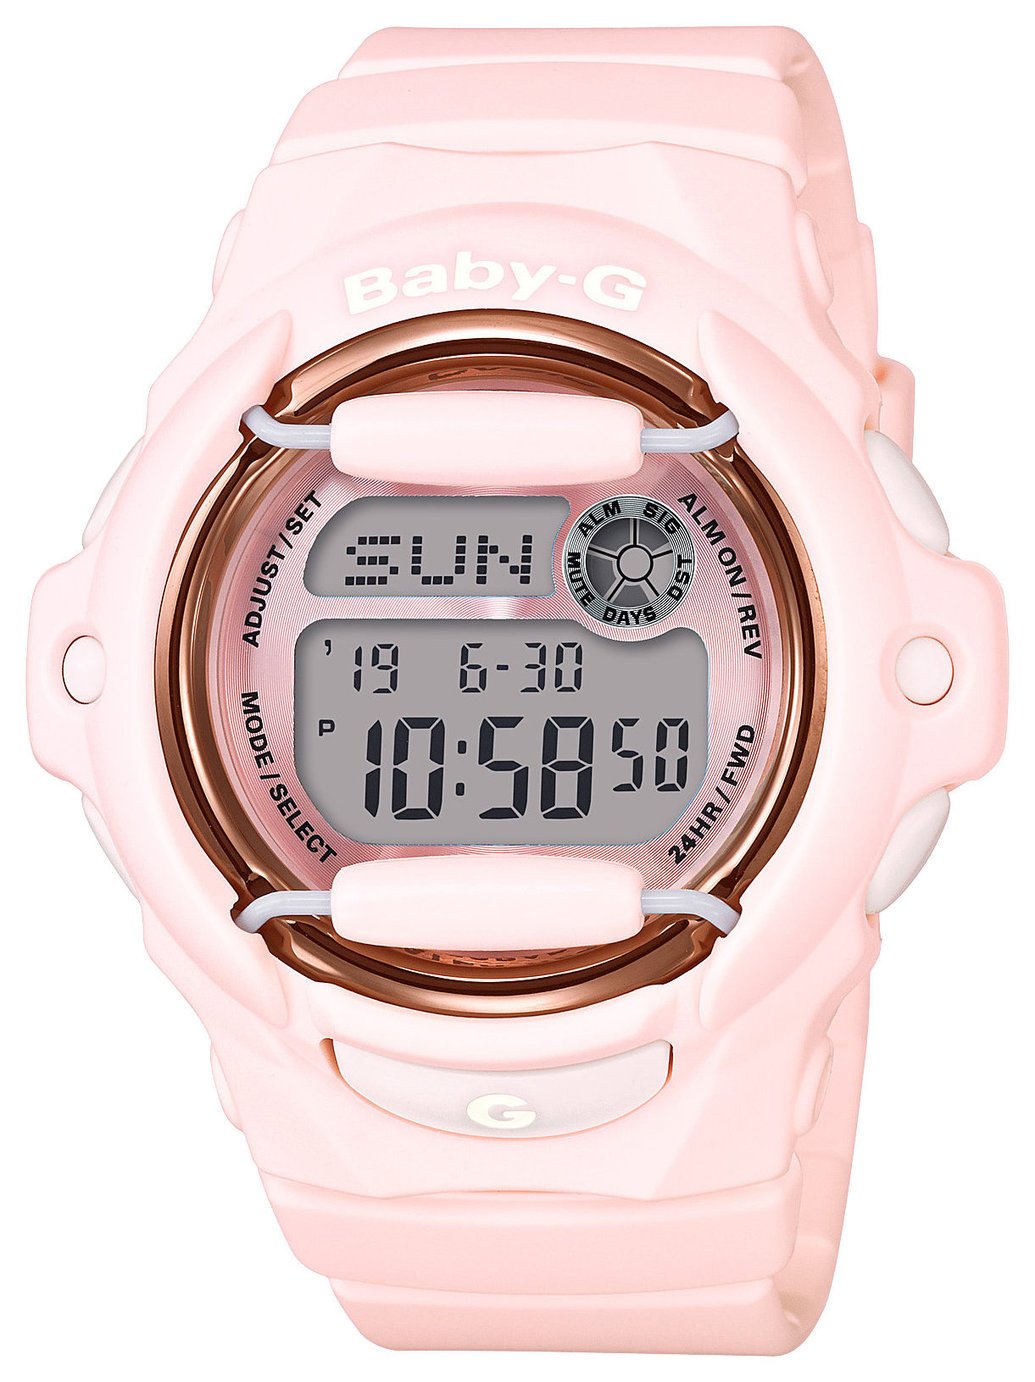 Casio Baby-G Pink World Time Telememo Digital Watch review